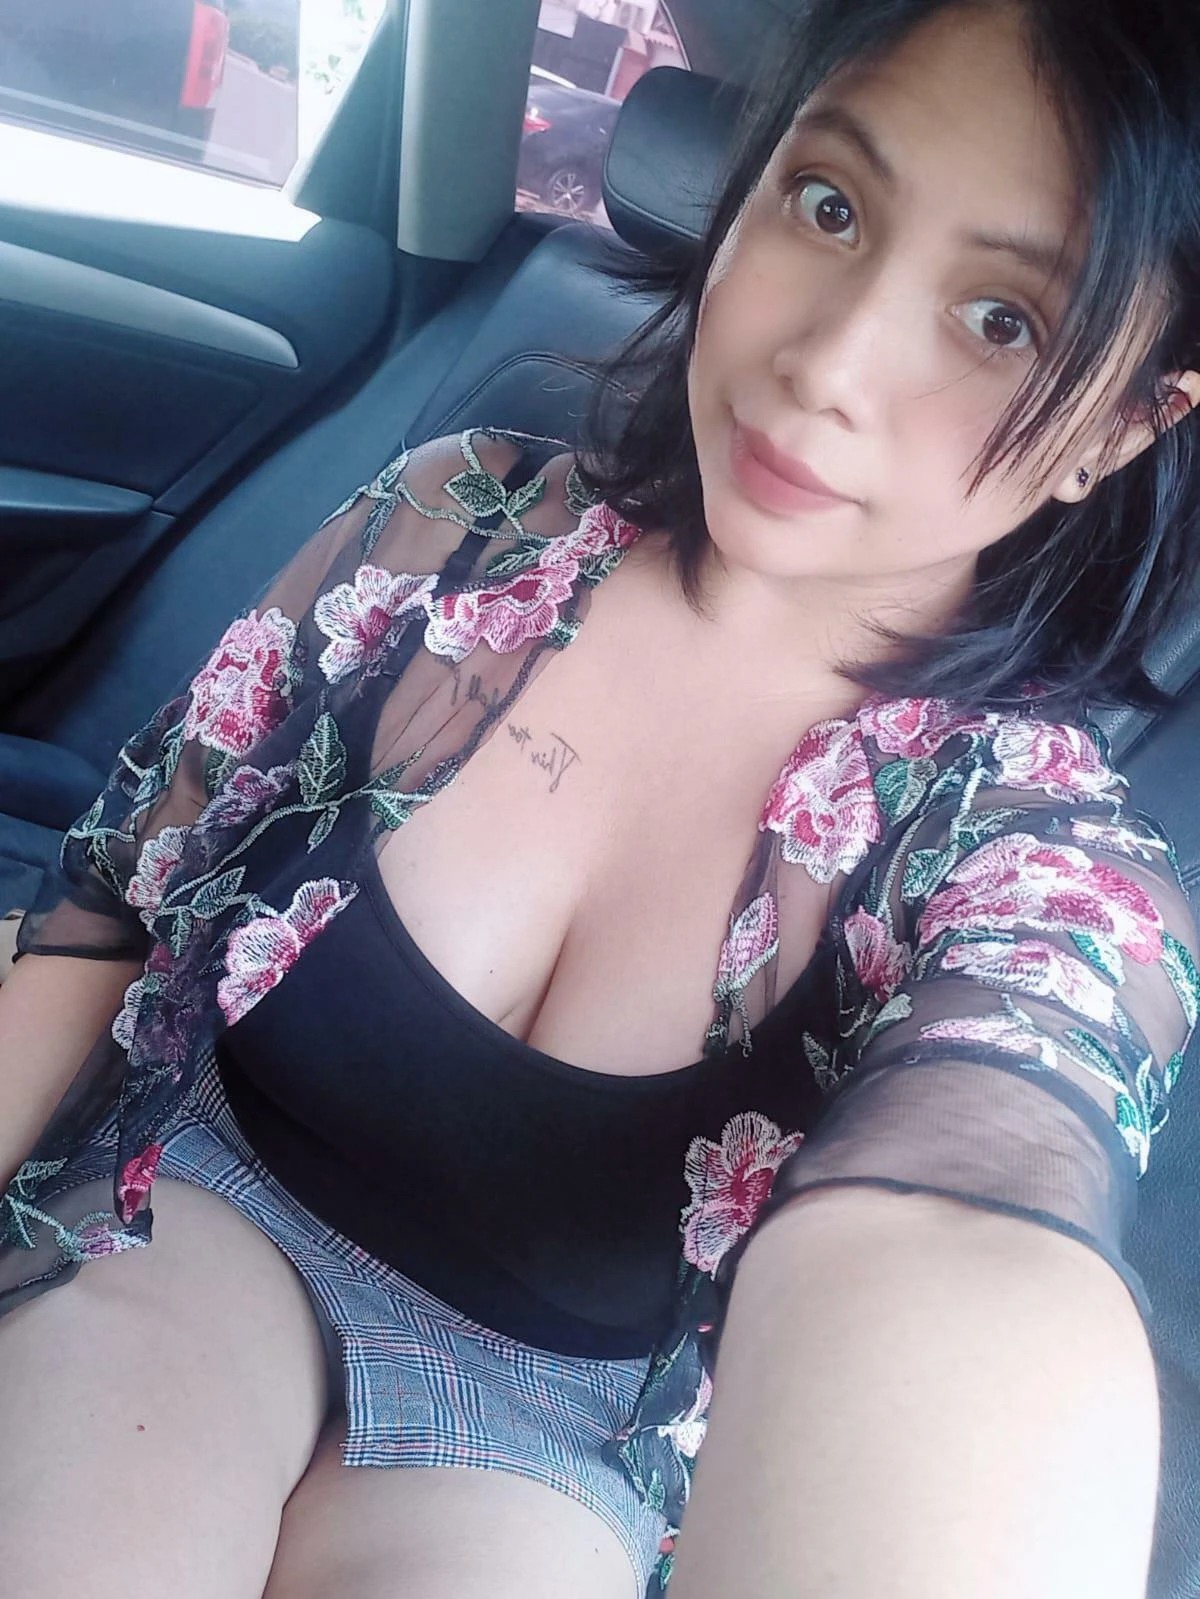 Would u like to fuck me in the back of your car? ?